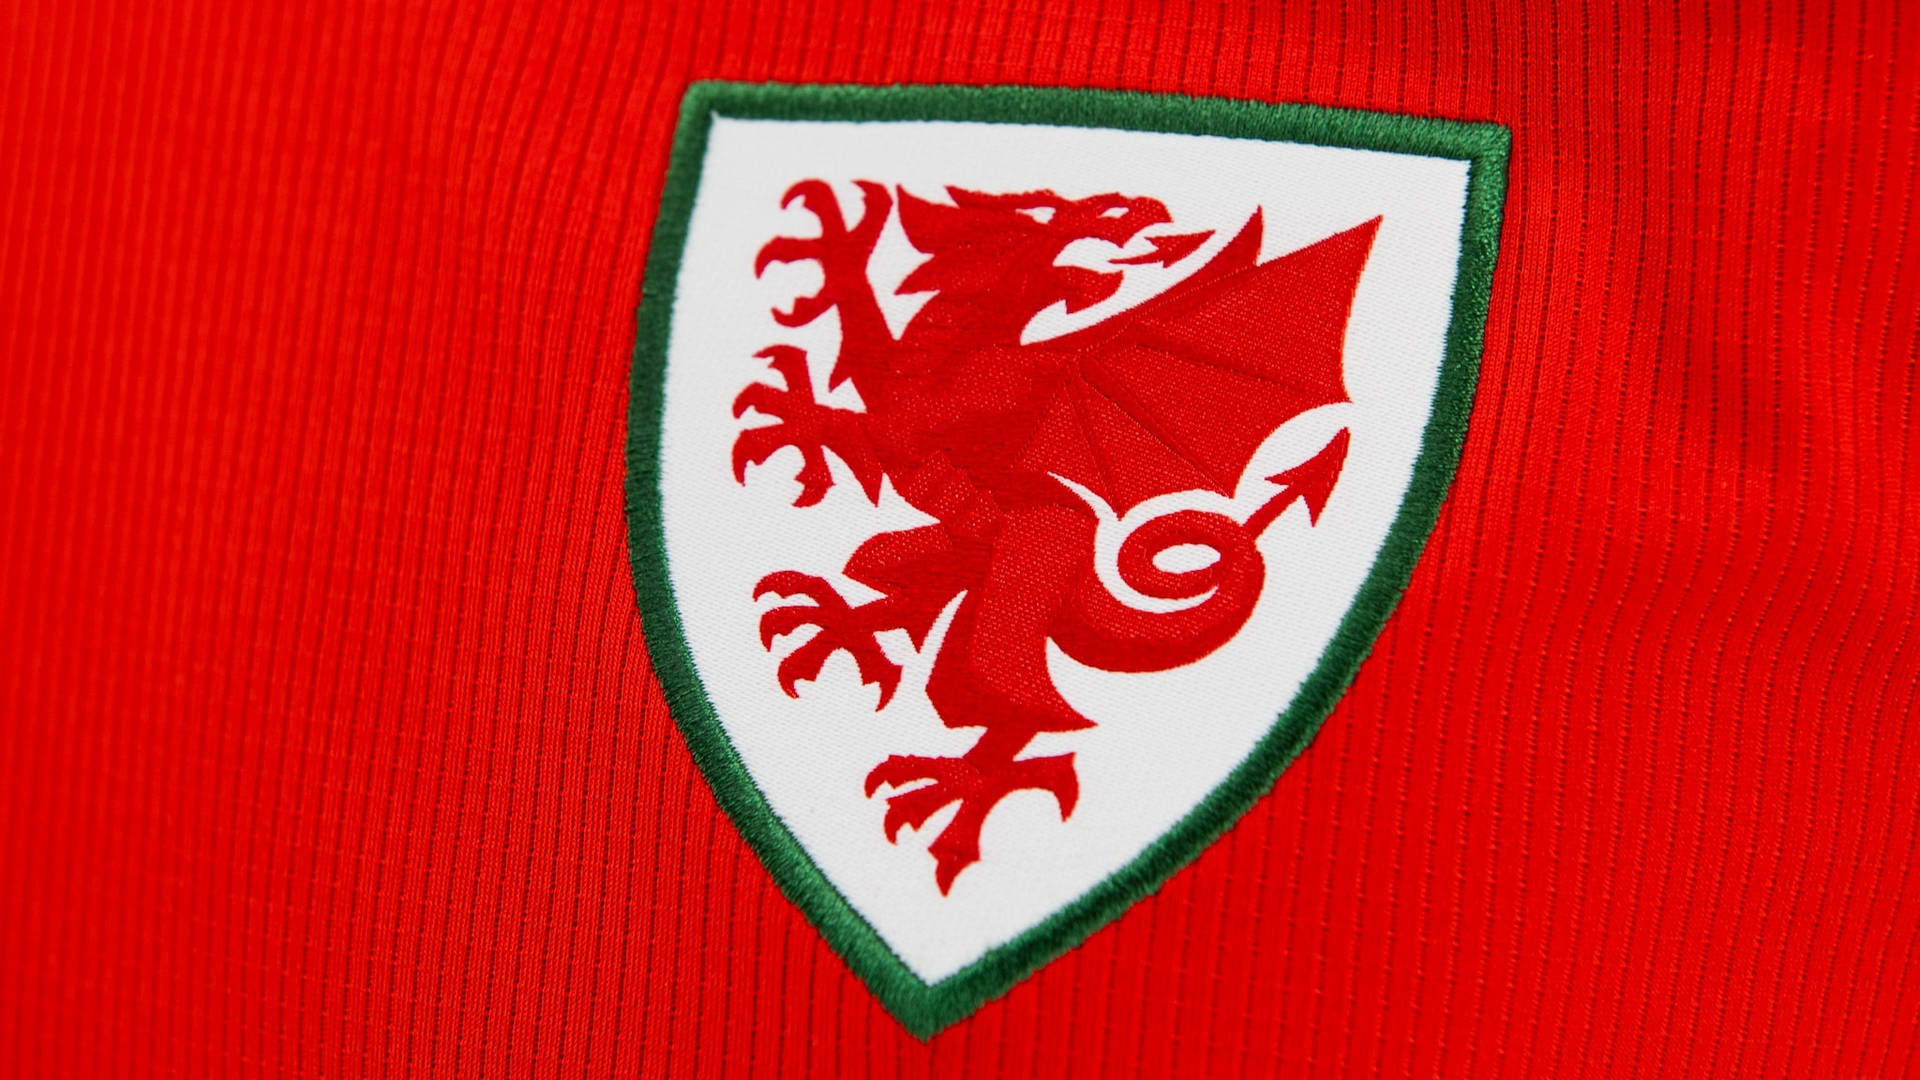 Wales National Football Team Crest On Fabric